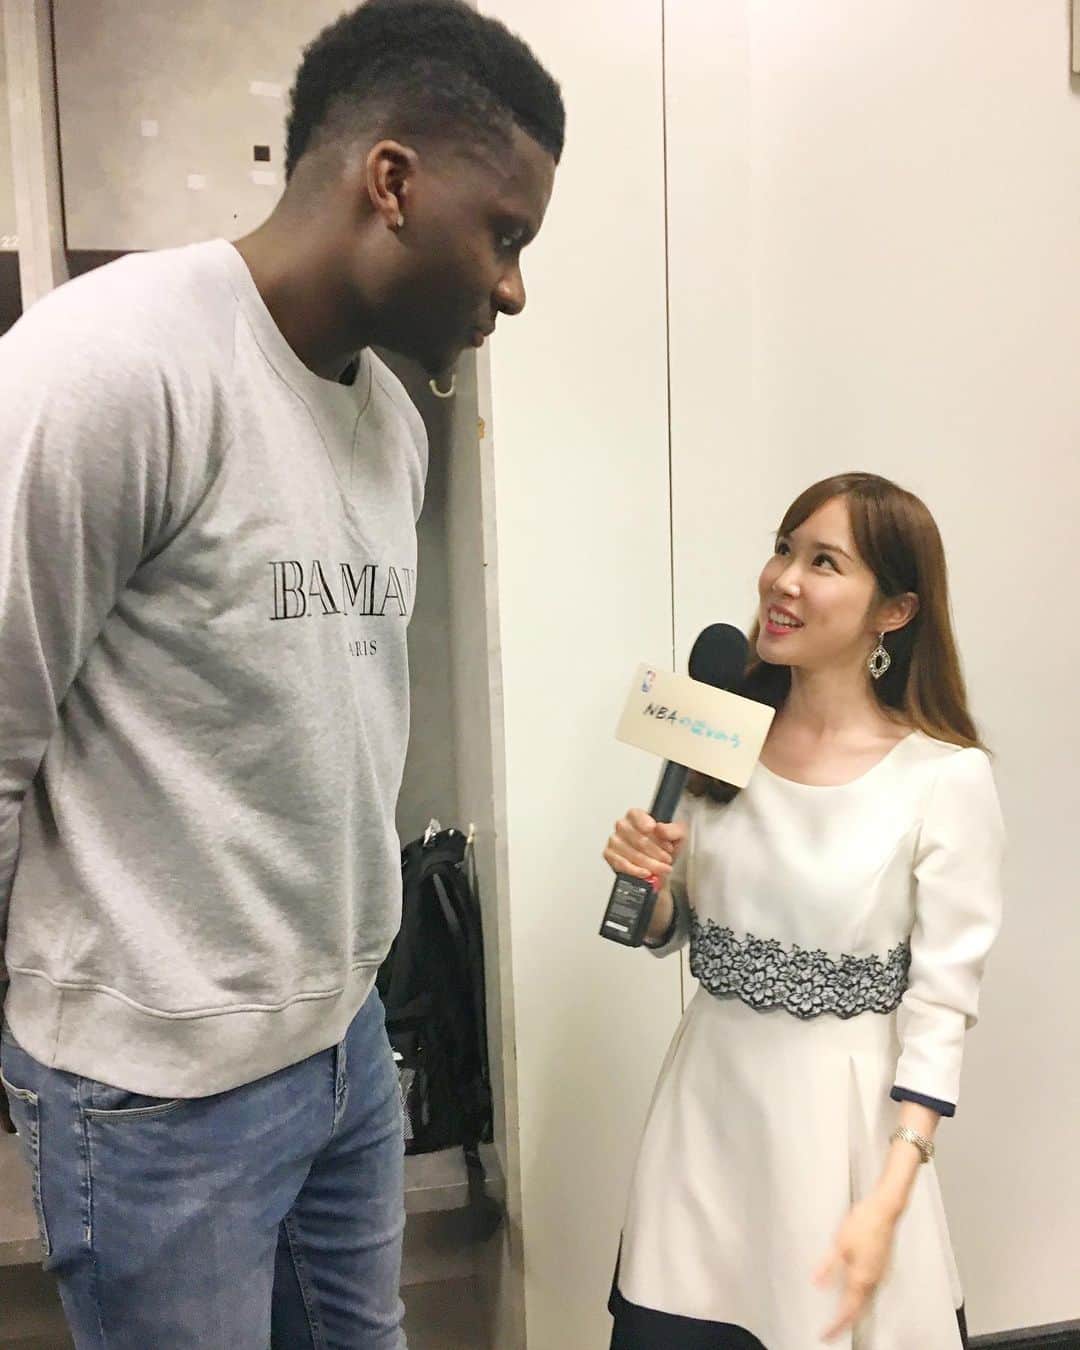 メロディー・モリタさんのインスタグラム写真 - (メロディー・モリタInstagram)「So excited to reveal that I'm flying to Japan tomorrow to report courtside & conduct interviews at the @NBA Japan Games happening next week!!😃🔥✨ As I previously shared, it's been 16 years since an NBA game has been held in Japan, so I'm deeply honored to be a part of it. Many NBA fans are esp. anticipating Russell Westbrook's Houston Rockets debut in Japan, taking on the Toronto Raptors! The NBA Japan Games 2019 Presented by Rakuten will also be viewable for free on RakutenTV!📺 This is such a dream come true moment for many NBA fans that will surely go down in history. Please look forward to it!💪 P.S. Swipe over to see me do some basketball action🙈 (I was used to seeing the players do effortless handling and realized that it is wayyy harder than it looks😂) * 16年ぶりに日本で開催される『NBA #ジャパンゲーム』‼️ 私はコートサイドからのリポート＆インタビューを担当させて頂きます!!🎤🏀 明日、NYから日本へ出発です✈️ * 昨シーズンのNBAチャンピオンであるラプターズ VS new-duo ロケッツ。ラッスル・ウェストブルック選手が移籍後、日本で初のRocketsでのプレーに期待です✨ * この「#NBAJapanGames 2019 Presented by Rakuten」は、RakutenTVでの無料ライブ配信も決定しました！👏 特設サイトに楽天IDでログインして頂くと無料で視聴可能のようです。夢の様なこの試合をアリーナで、又は無料ライブ配信で、思いっきり一緒に楽しみましょう!!😆🙌 * P.S. レッグスルーなどに頑張って初挑戦してみましたが、やはり少しバレエっぽい...😅 スワイプして見てみてください🙈」10月2日 7時09分 - melodeemorita